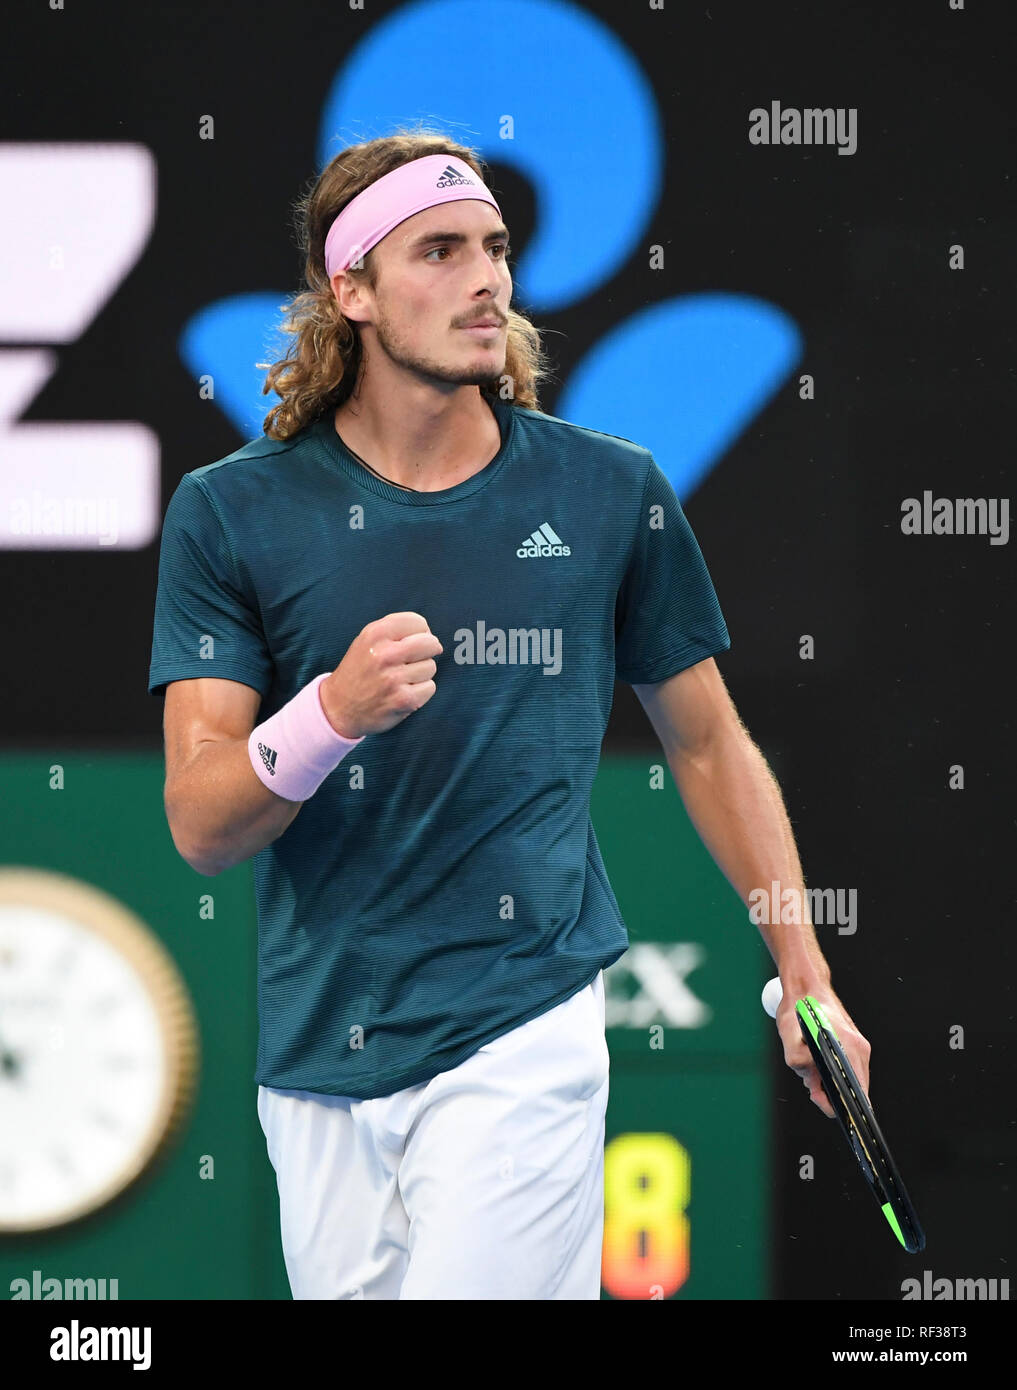 Melbourne, Australia. 24th Jan, 2019. Stefanos Tsitsipas of Greece reacts  during the men's singles semifinal match between Rafael Nadal of Spain and  Stefanos Tsitsipas of Greece at the 2019 Australian Open in